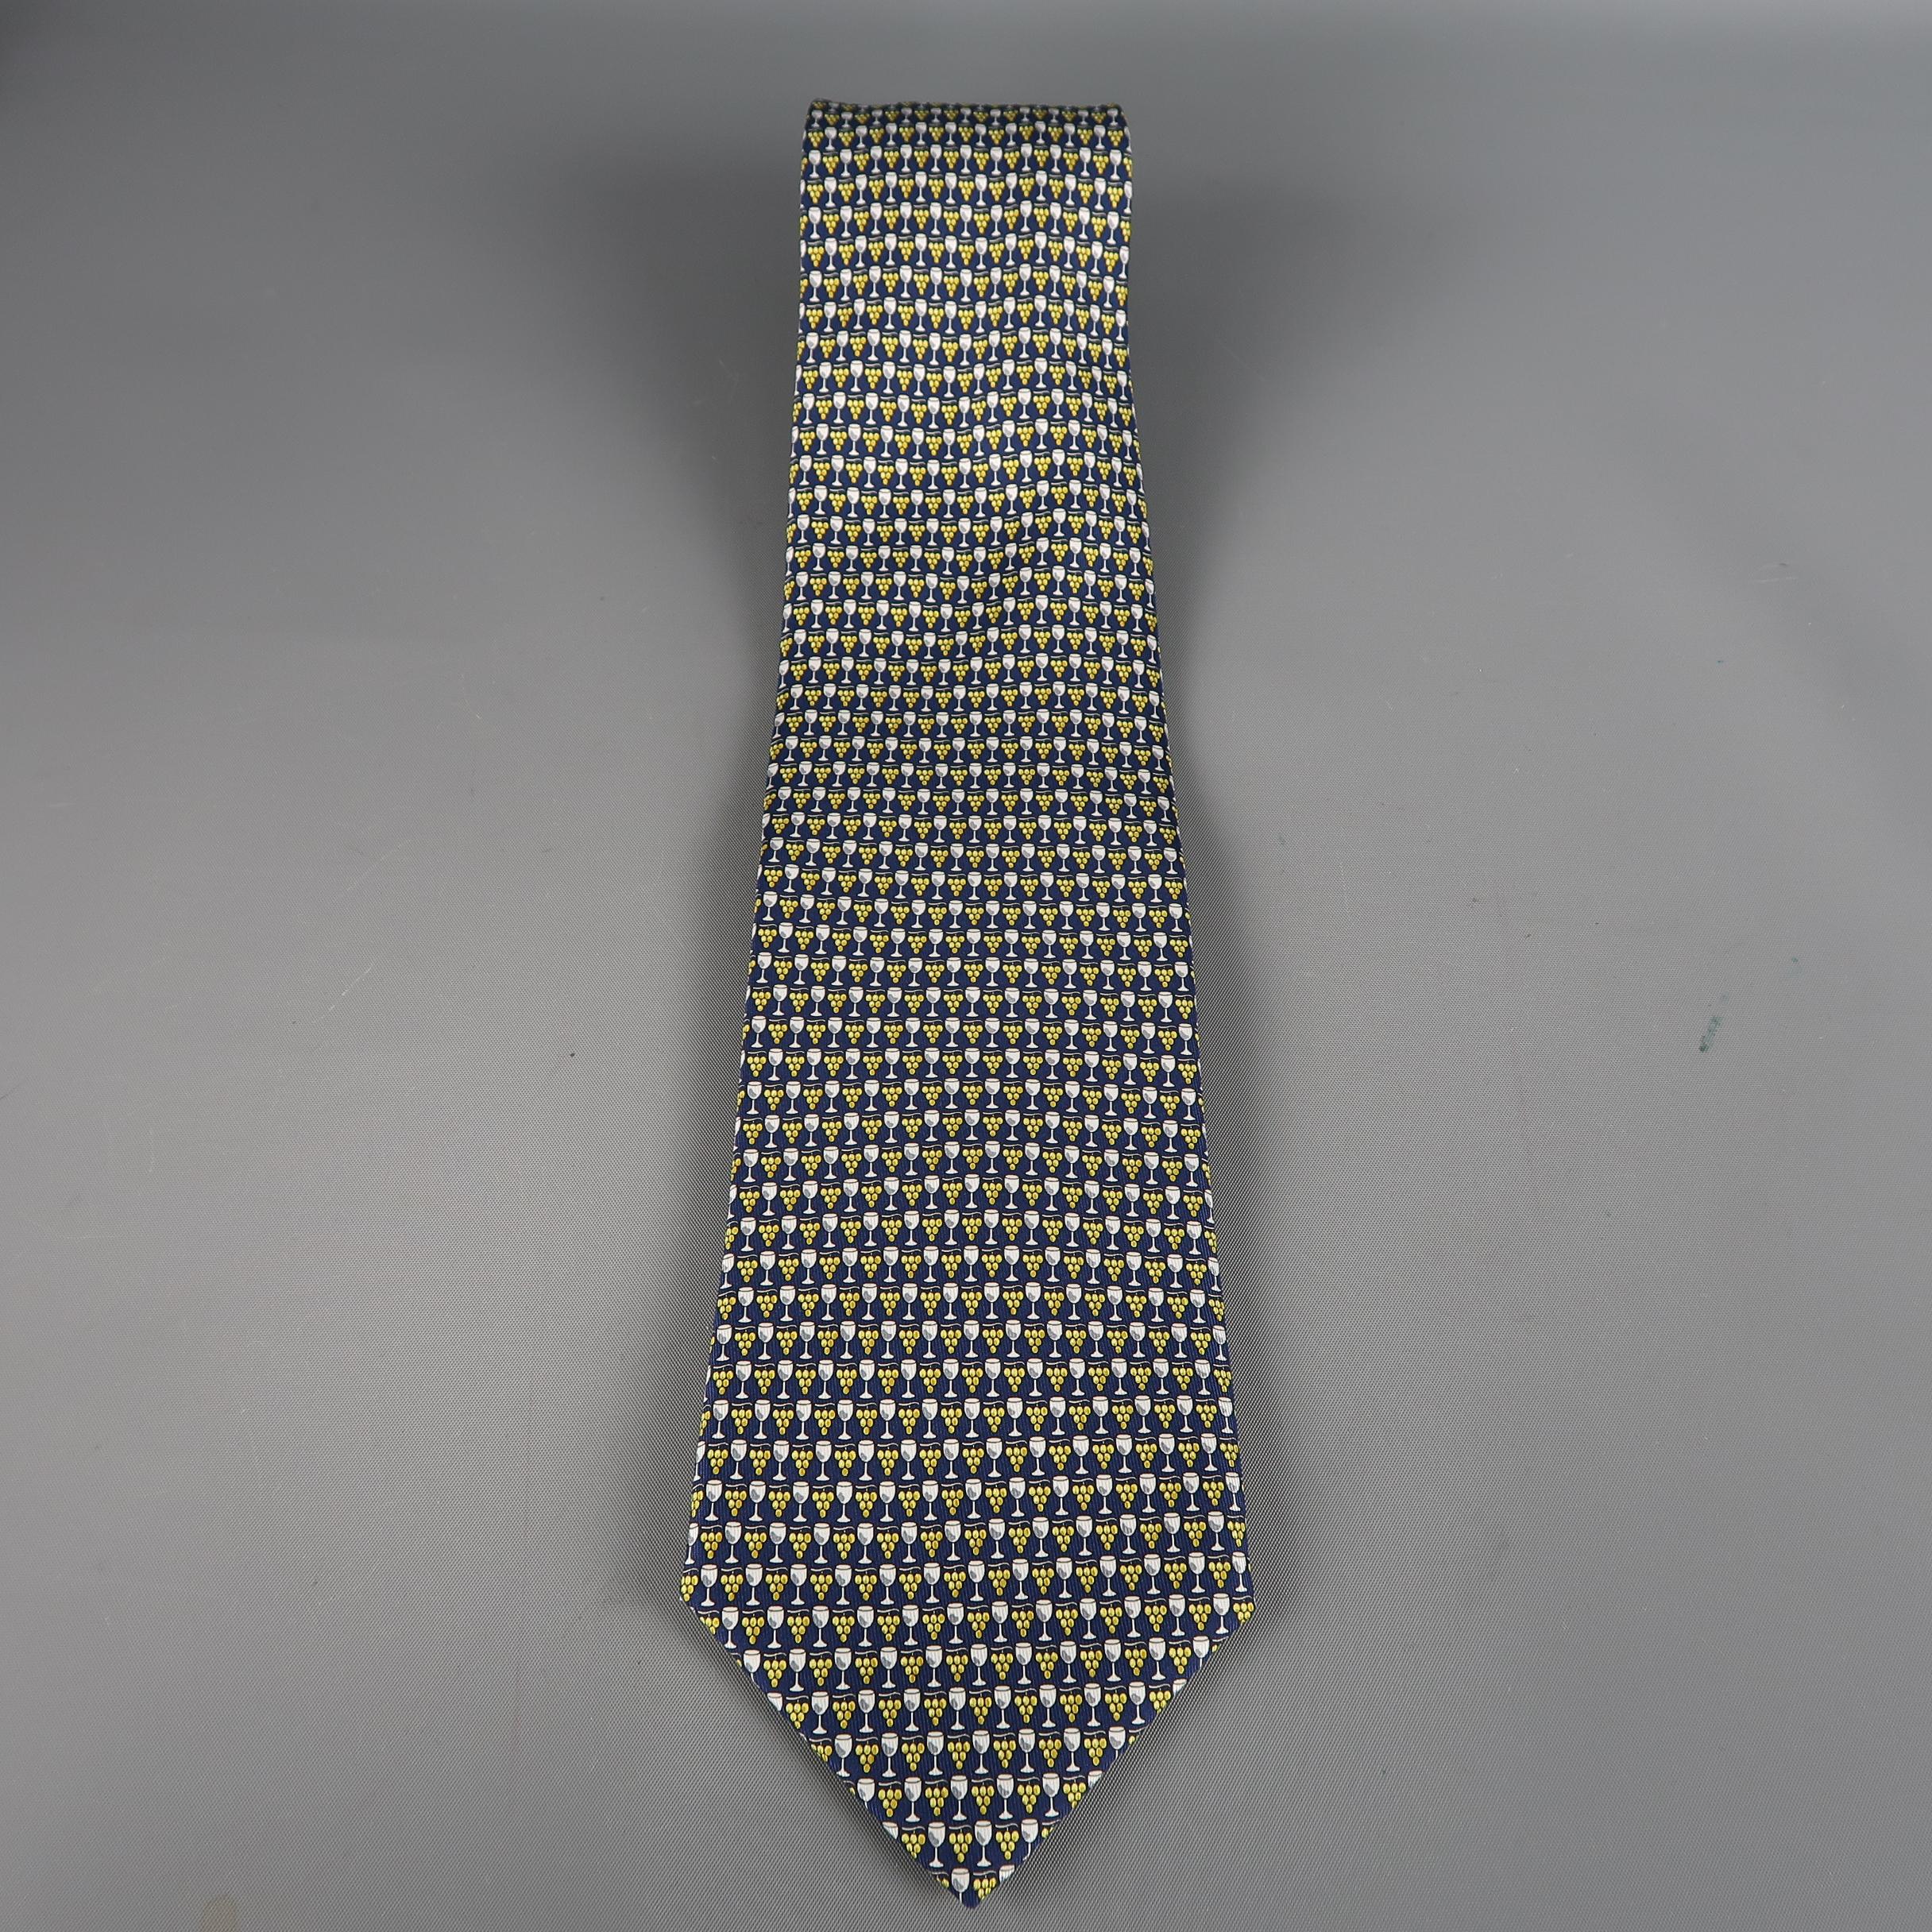 SALVATORE FERRAGAMO tie come in navy silk  with an all over wine glasses and grapes print. Made in Italy.
 
Excellent Pre-Owned Condition.
 
Width: 3.5 in.
